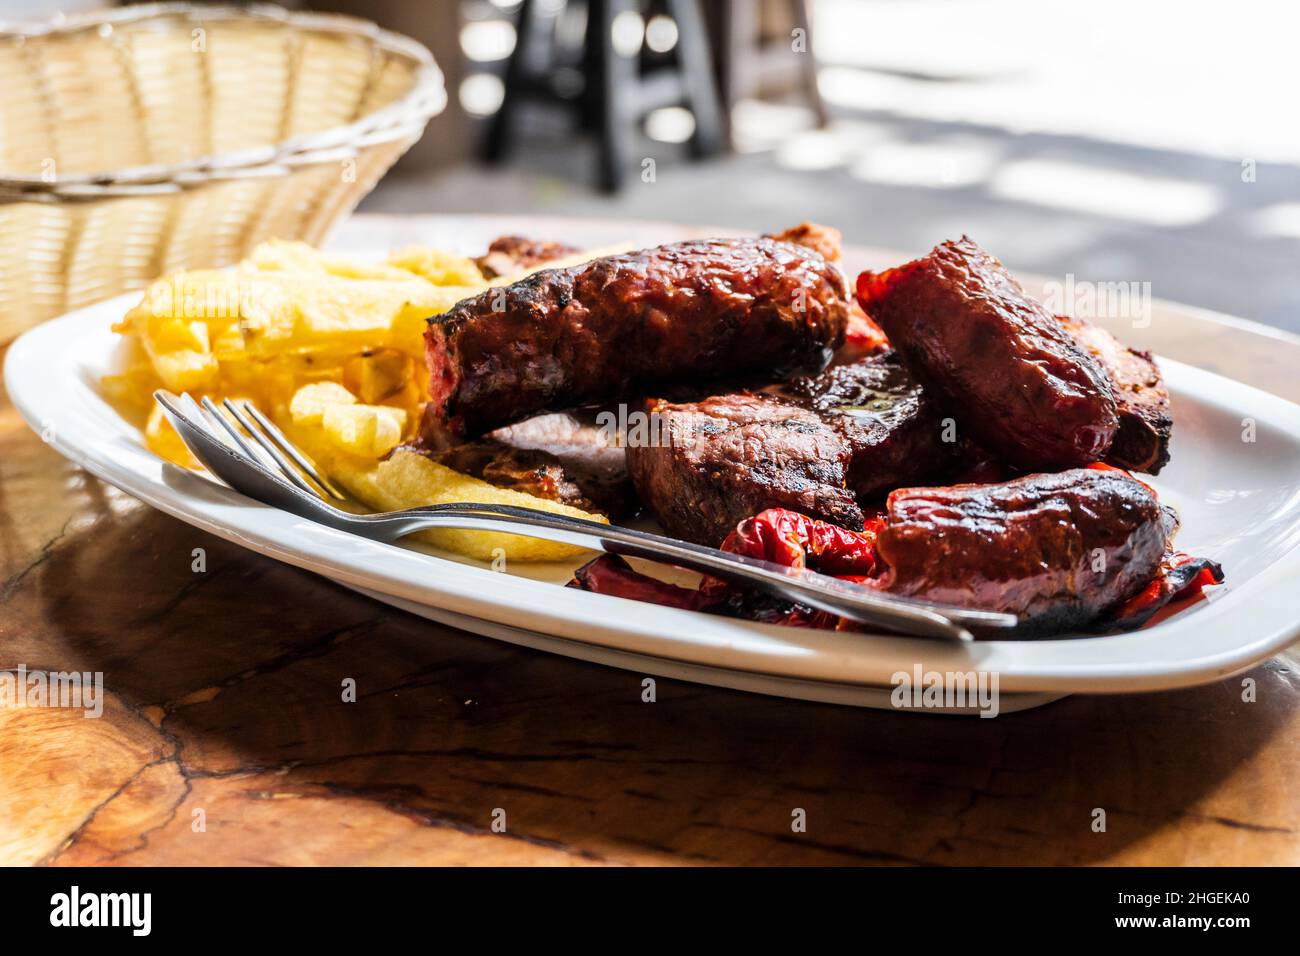 Sausage, veal and pork meat barbecued and served with french fries on Gran Canaria, Spain Stock Photo